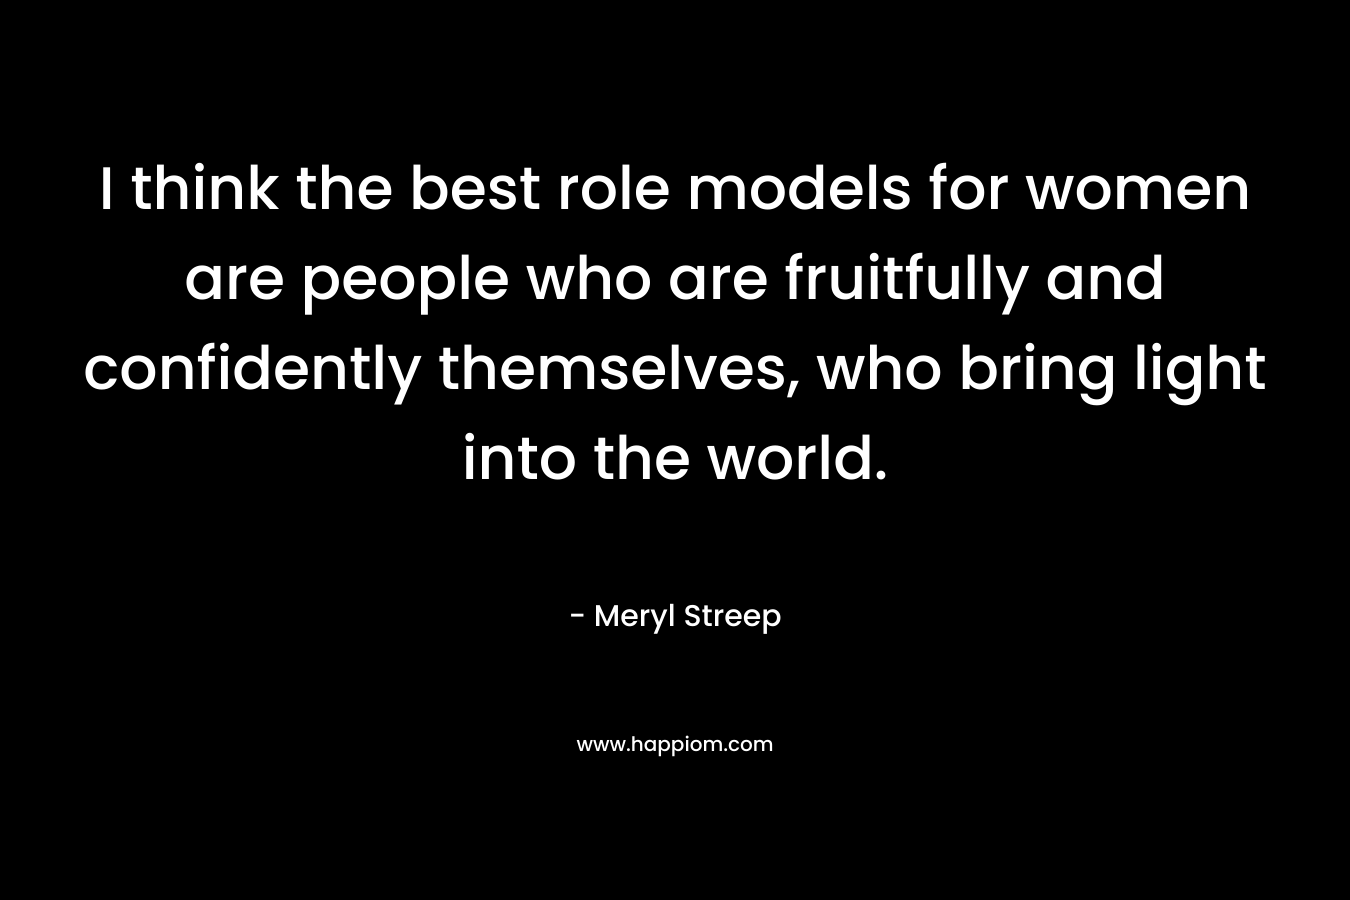 I think the best role models for women are people who are fruitfully and confidently themselves, who bring light into the world. – Meryl Streep